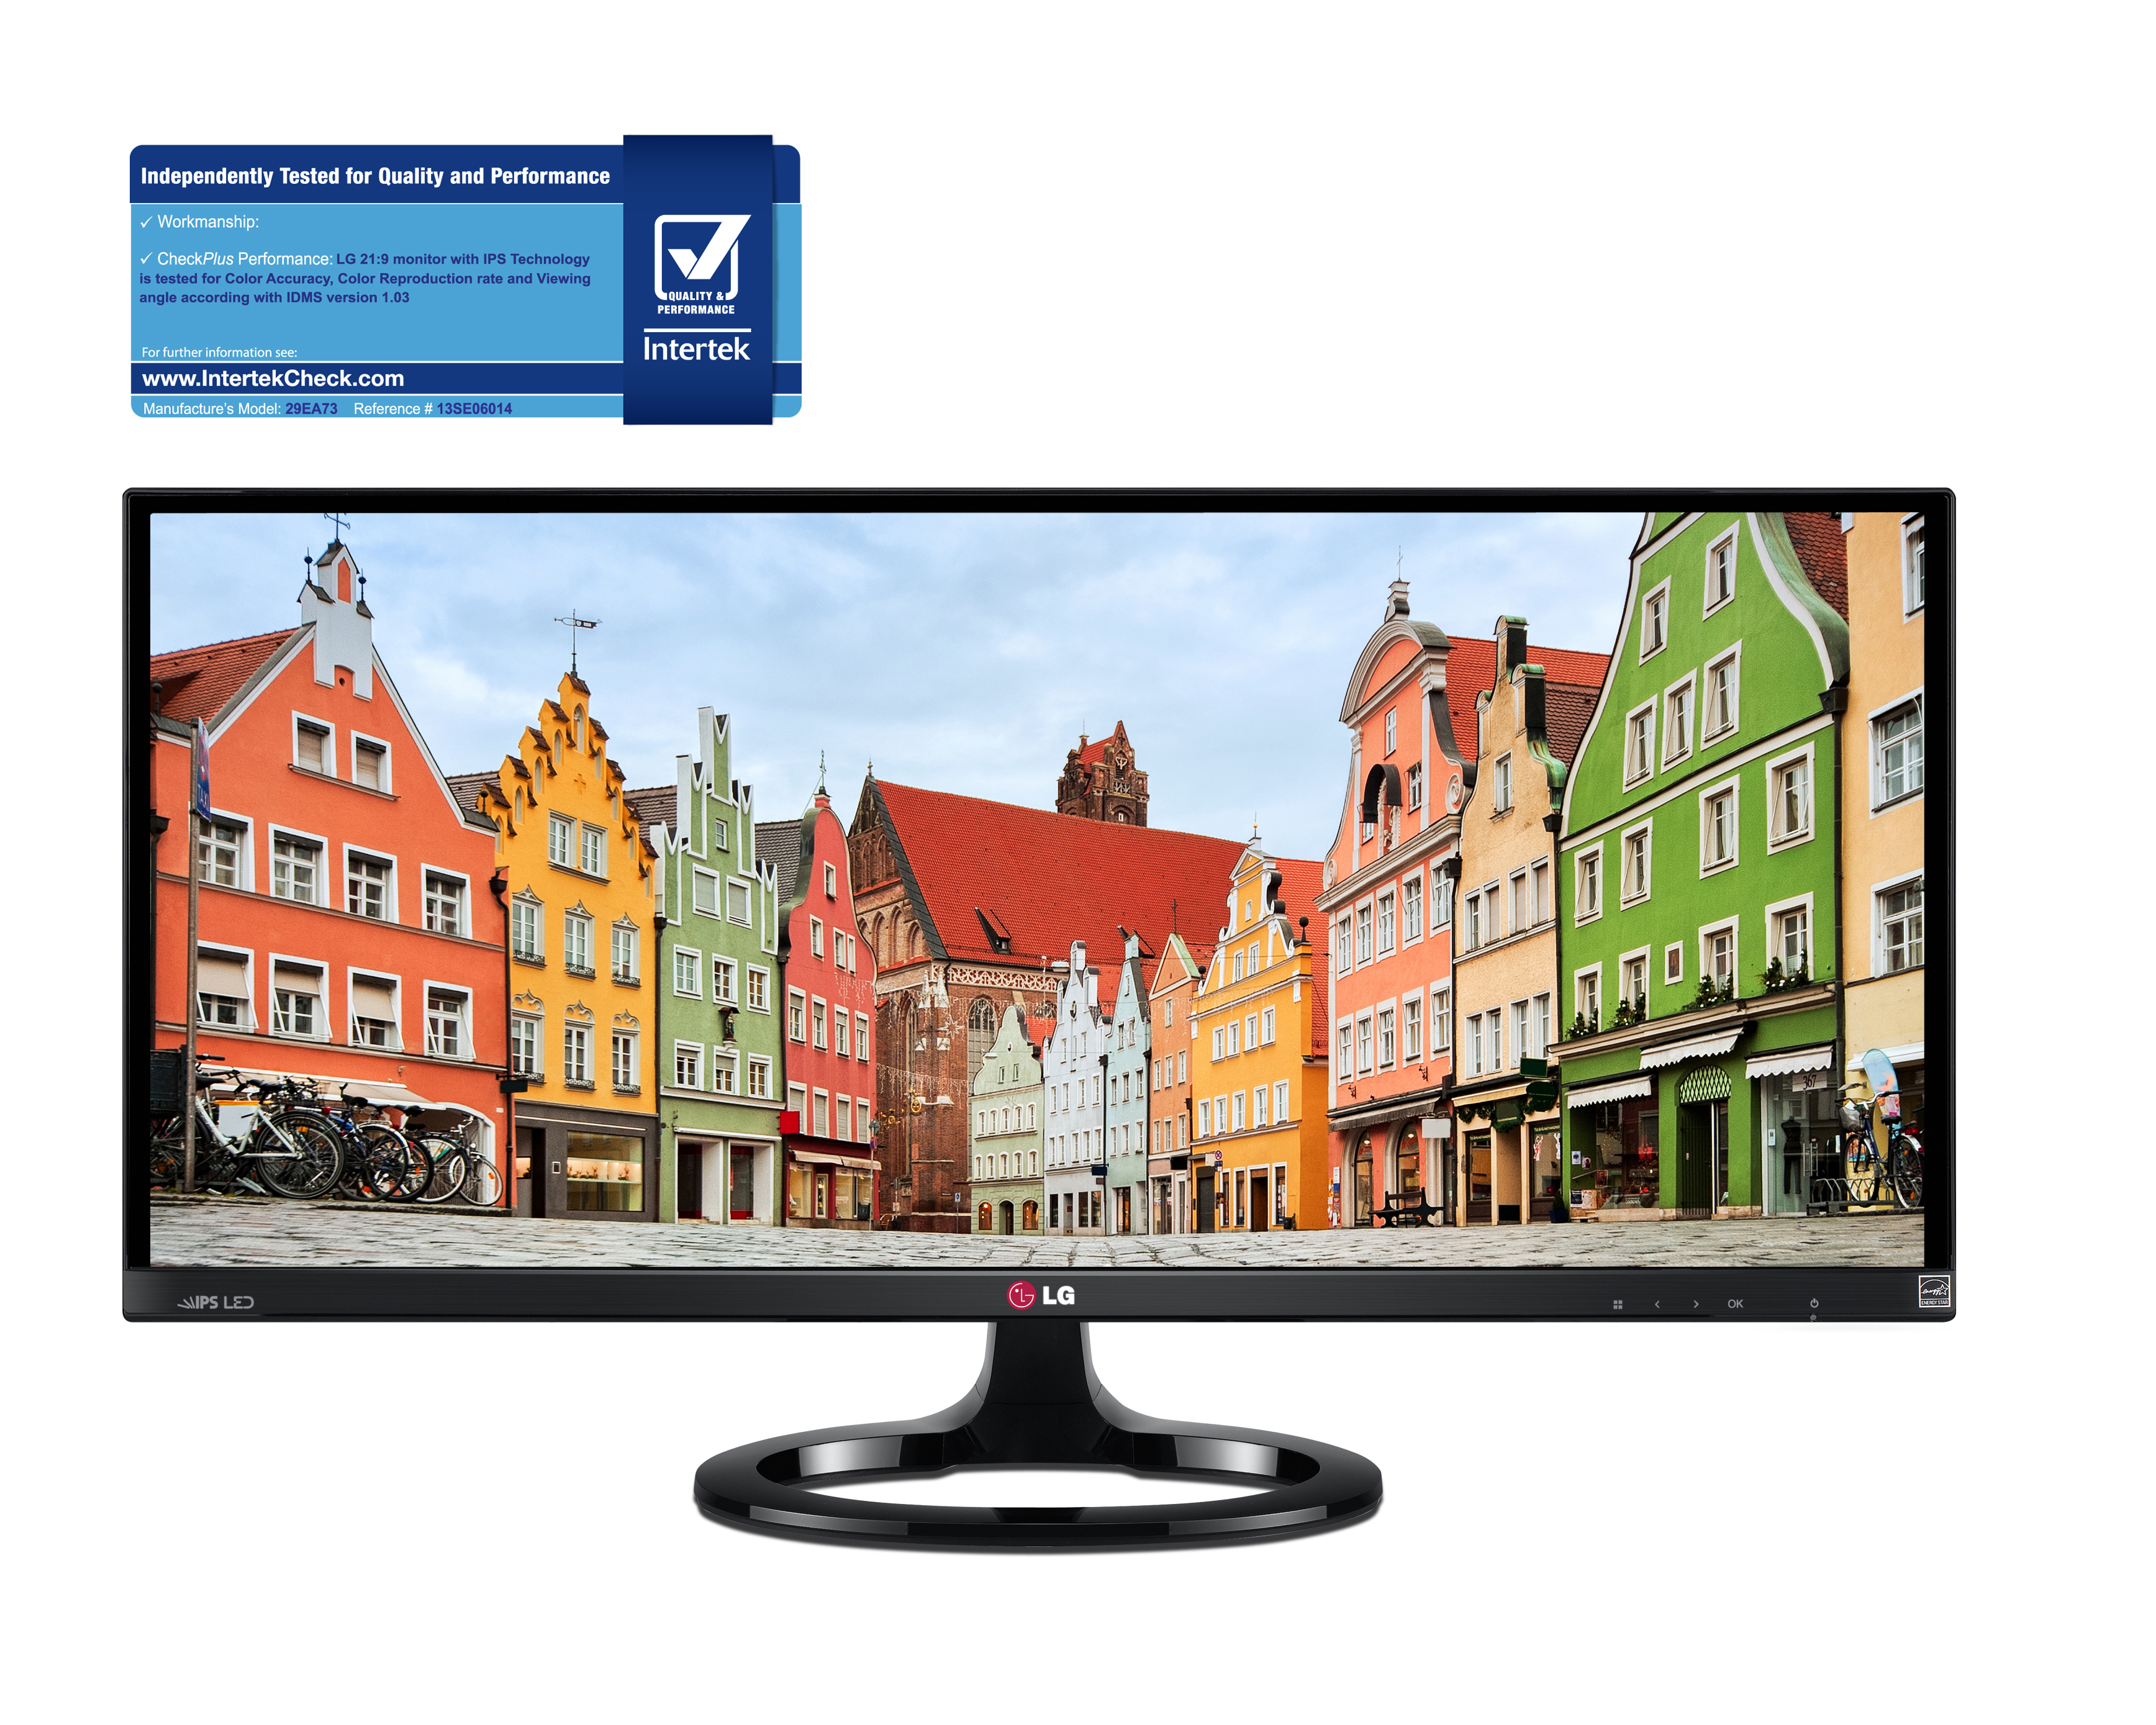 Front view of LG IPS 21:9 UltraWide Monitor model 29EA73 along with the Quality & Performance Mark (QPM) from Intertek in the top left corner